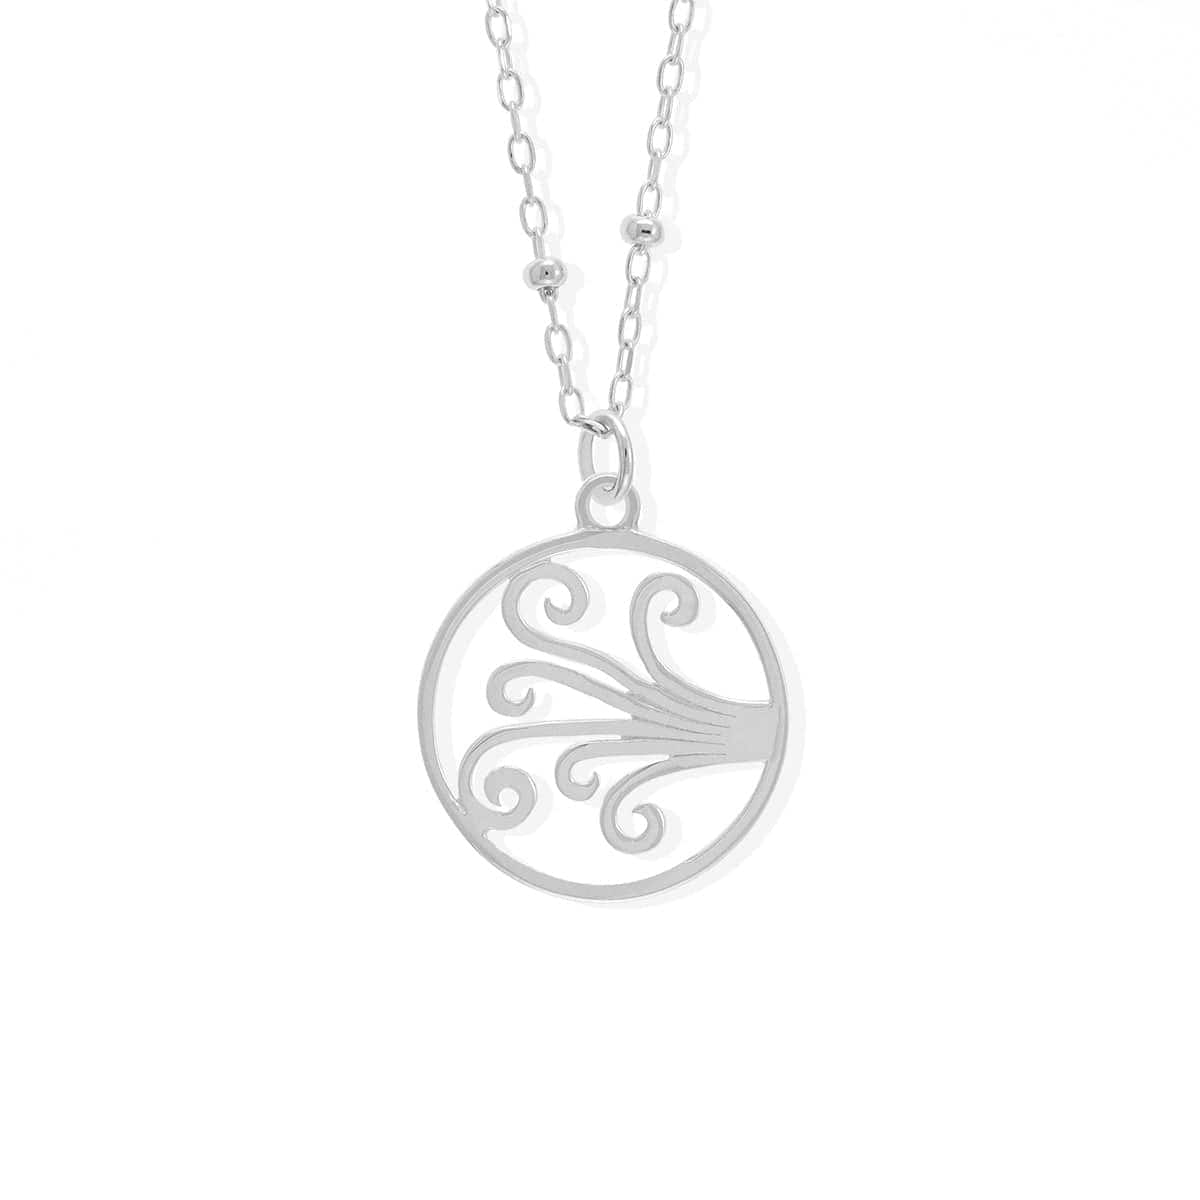 Boma Jewelry Necklaces Air Wind Element Necklace